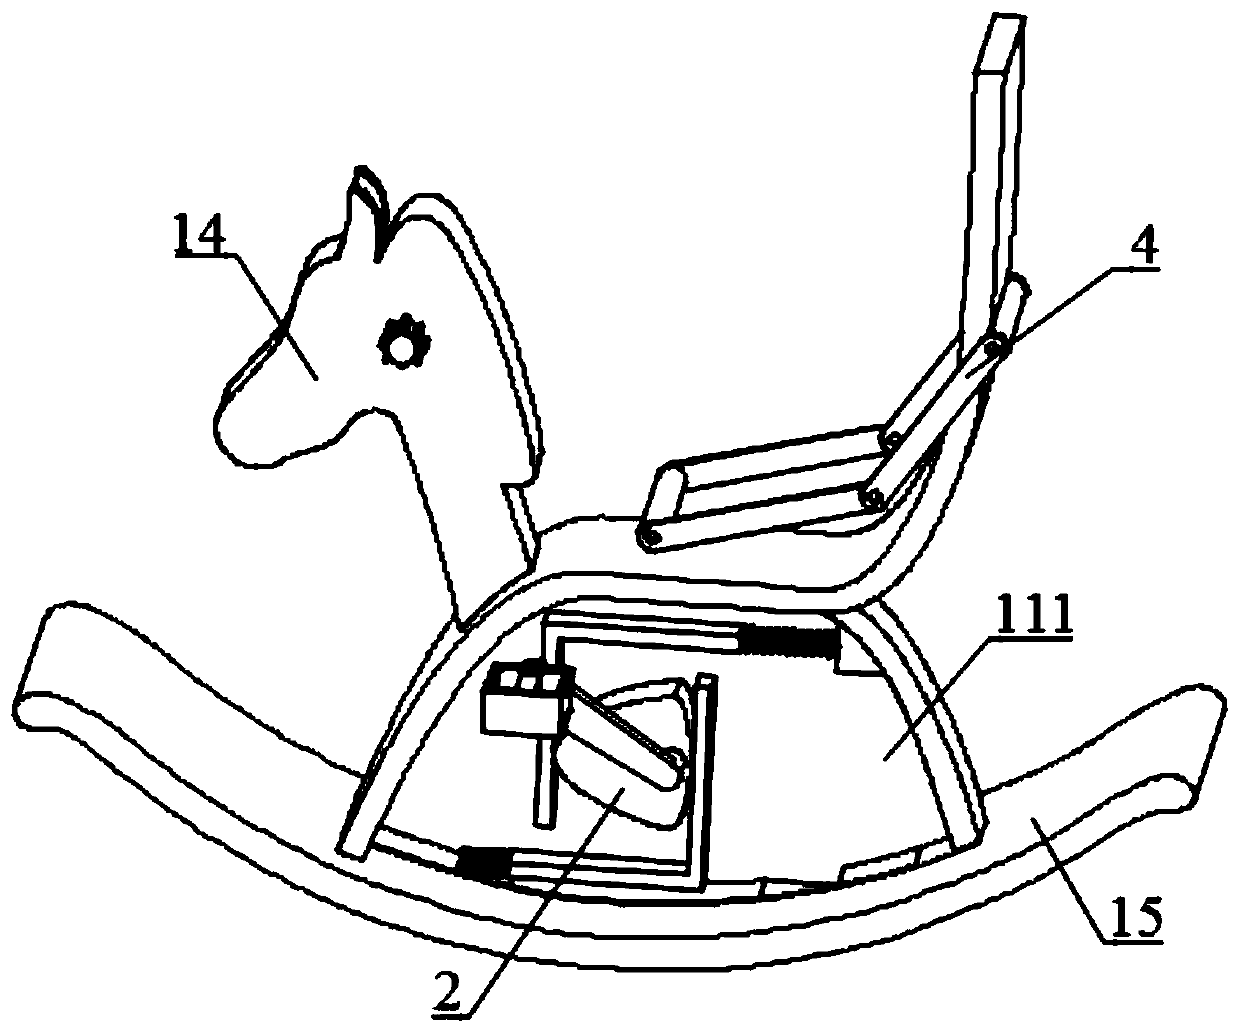 A fitness rocking horse